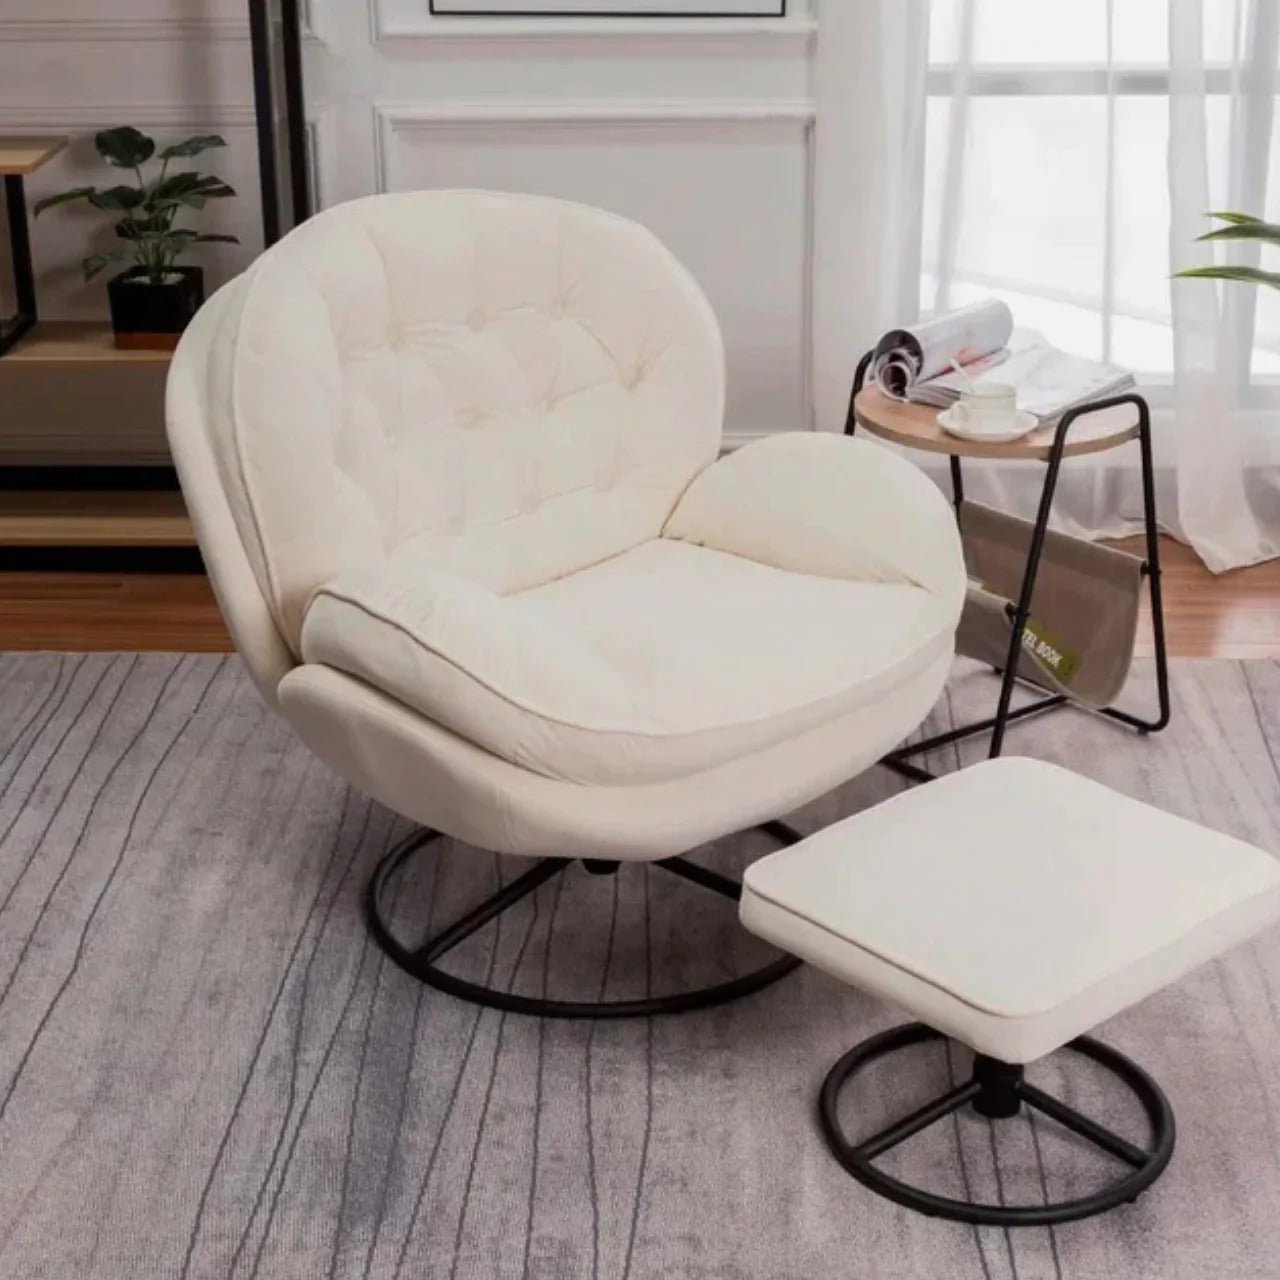 Buy Modern Accent Chairs Online | Cool Stuff & Accessories